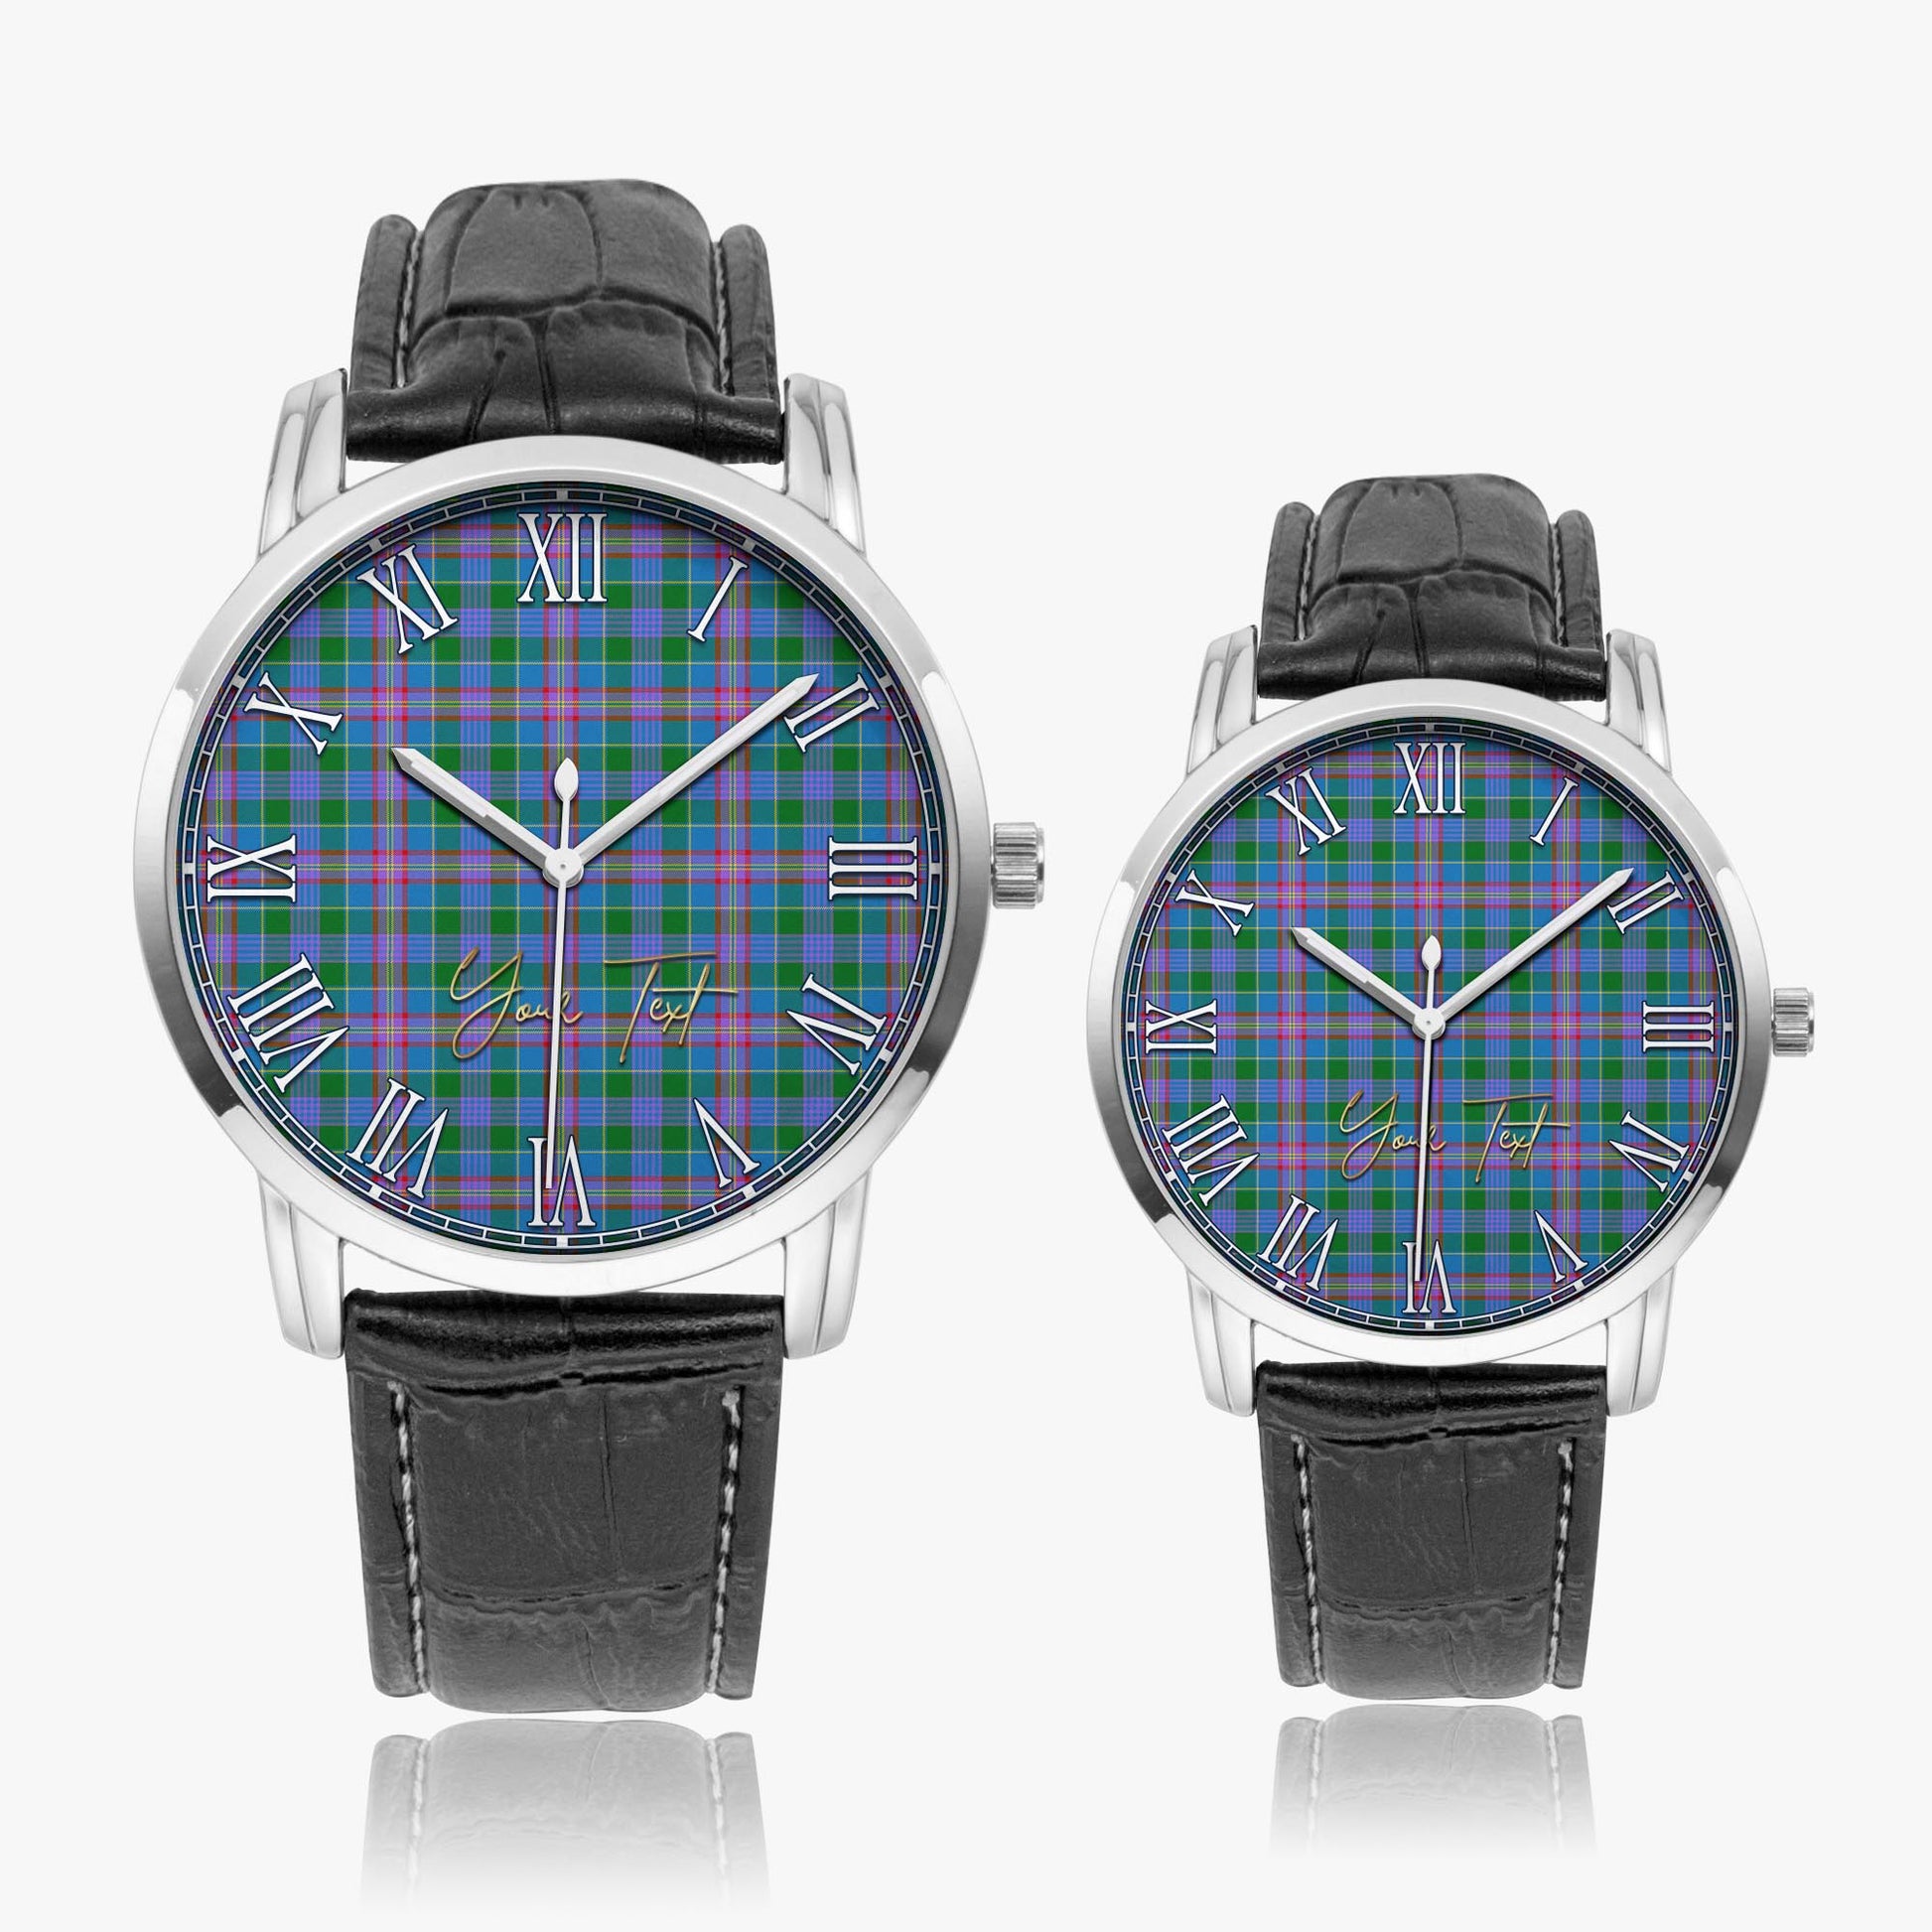 Ralston Tartan Personalized Your Text Leather Trap Quartz Watch Wide Type Silver Case With Black Leather Strap - Tartanvibesclothing